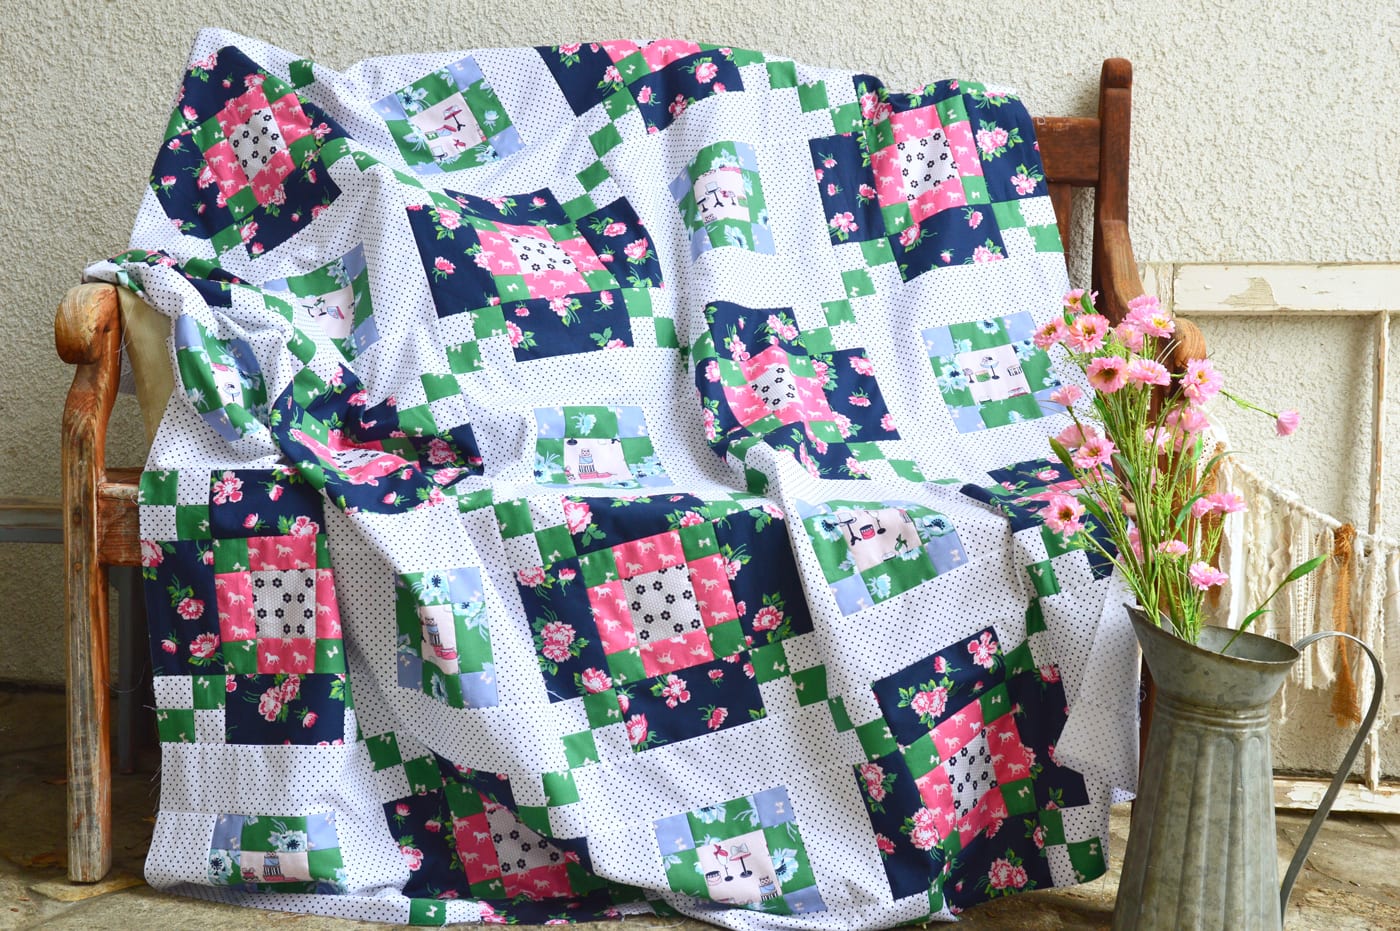 new quilt patterns, Across the Board Quilt pattern by Jedi Craft Girl, uses Derby Day Fabric by Melissa Mortenson for Riley Blake Designs #quilt #quilts #quiltpatterns #quiltpattern